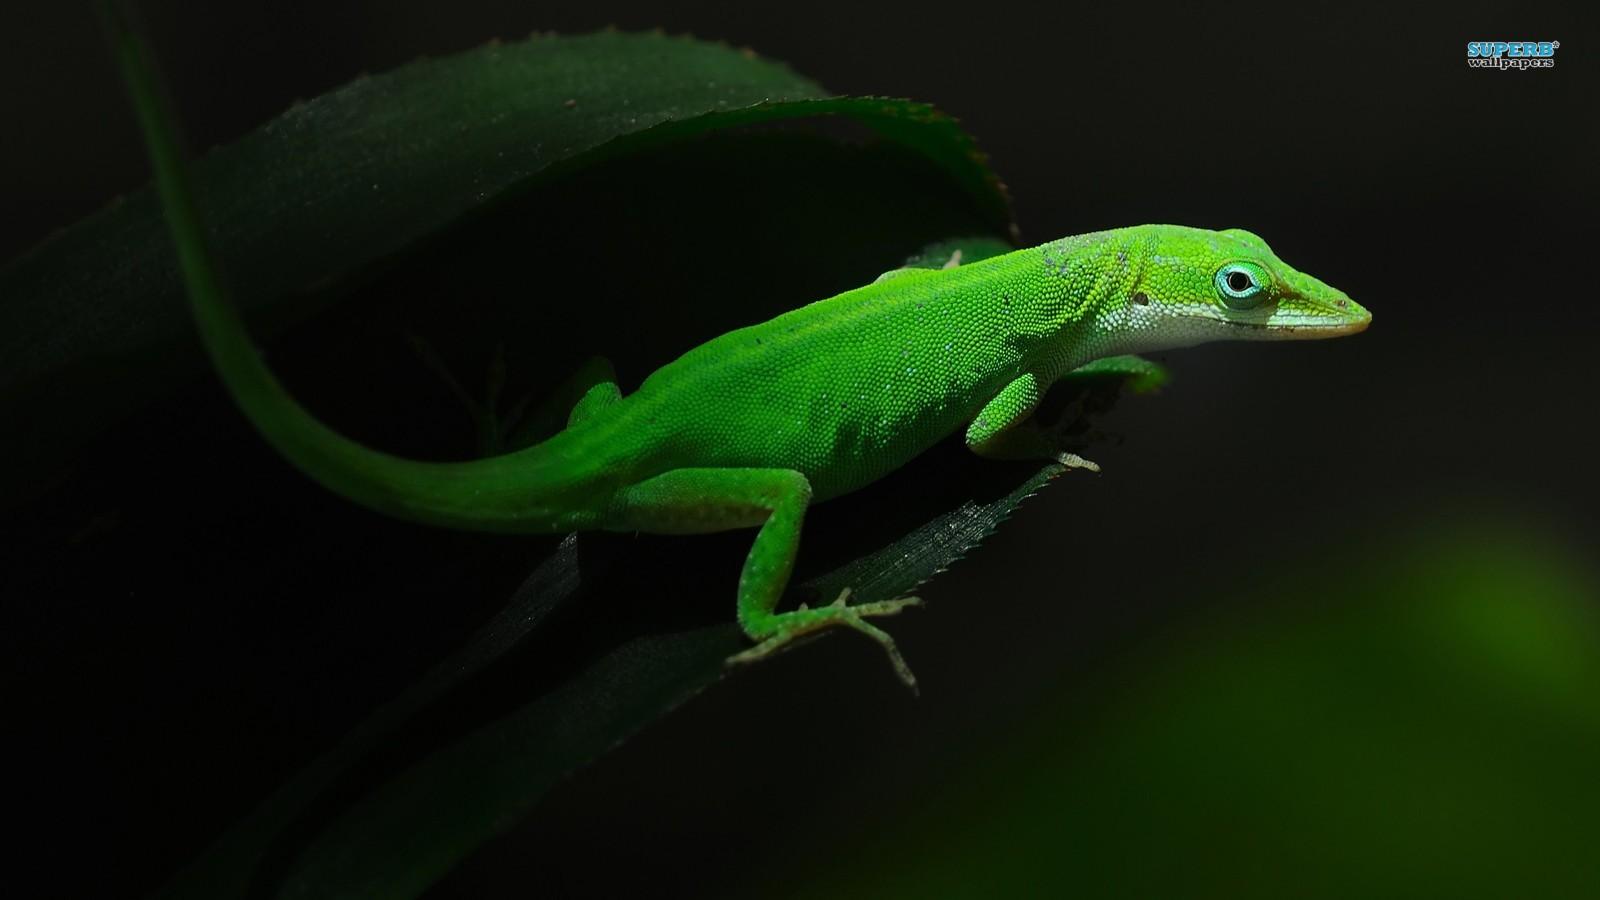 lizards image Gecko HD wallpaper and background photo